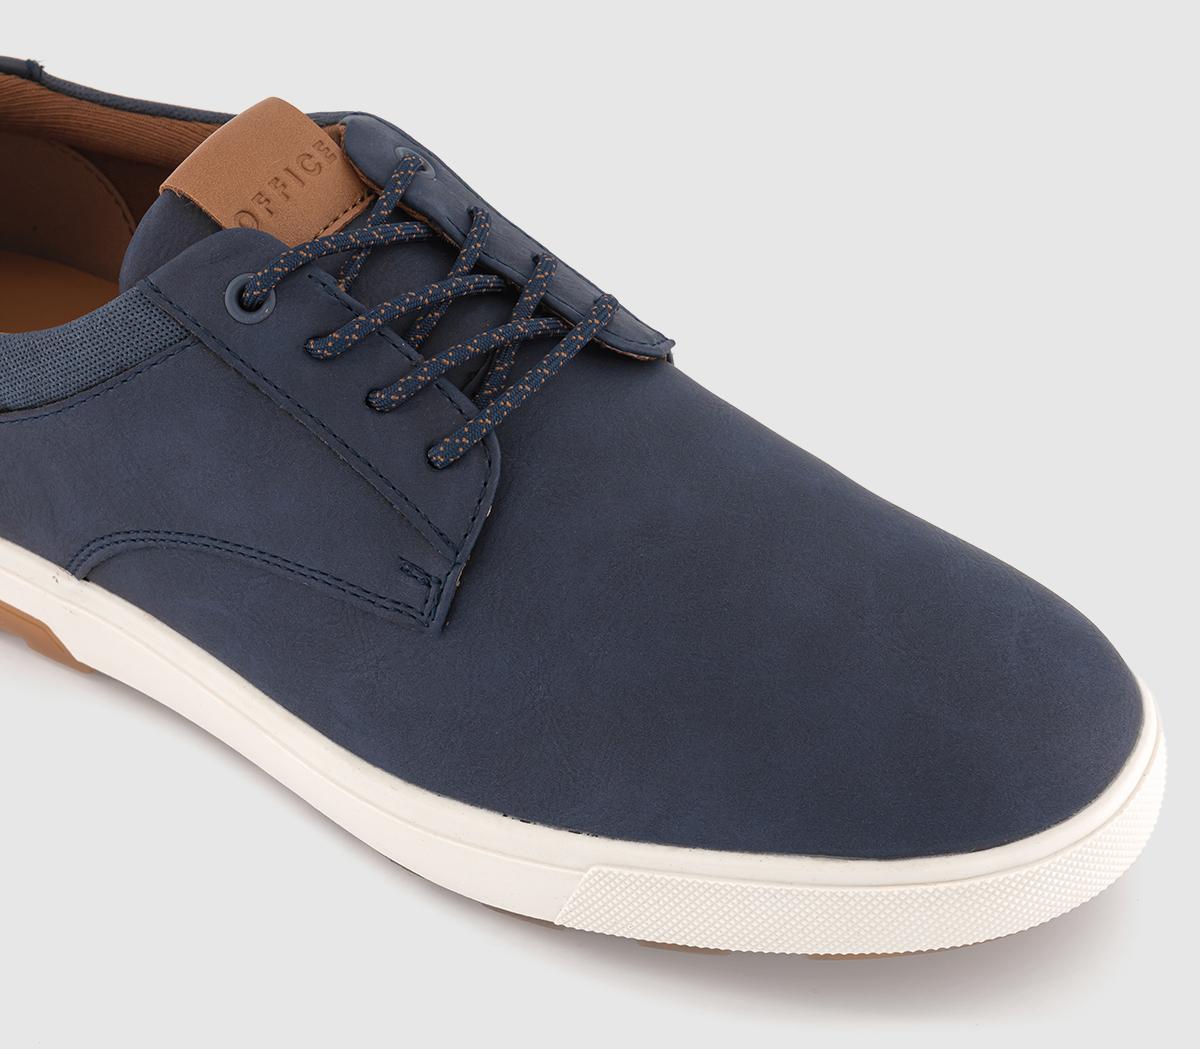 OFFICE Cannock Lace Up Shoes Navy - Men's Casual Shoes